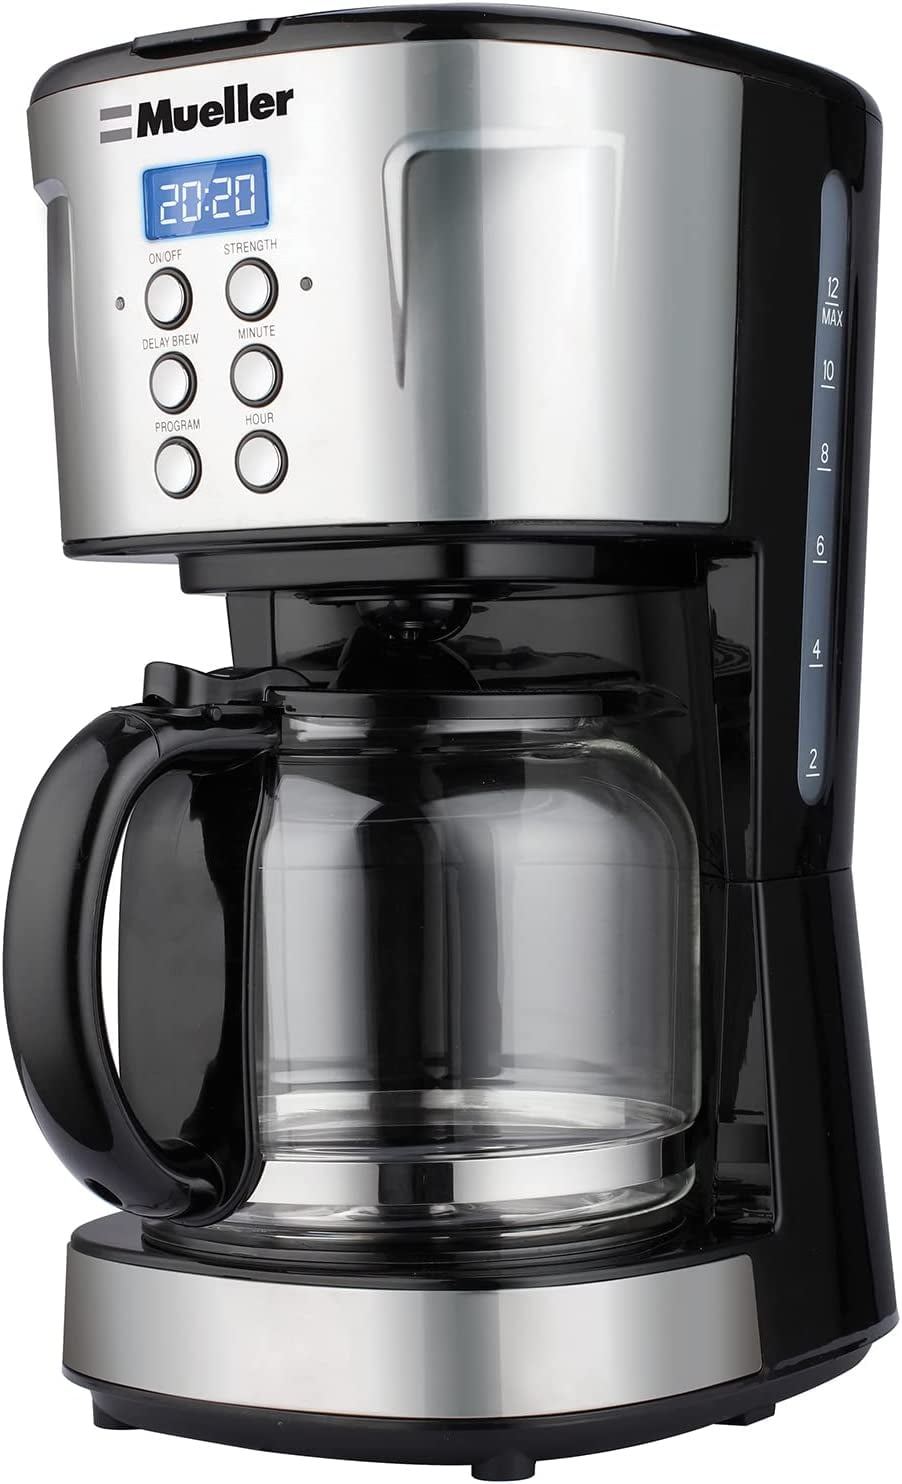 Farberware Side by Side Single Serve or 12 Cup Coffee Maker, Black with  Stainless Inset, New 